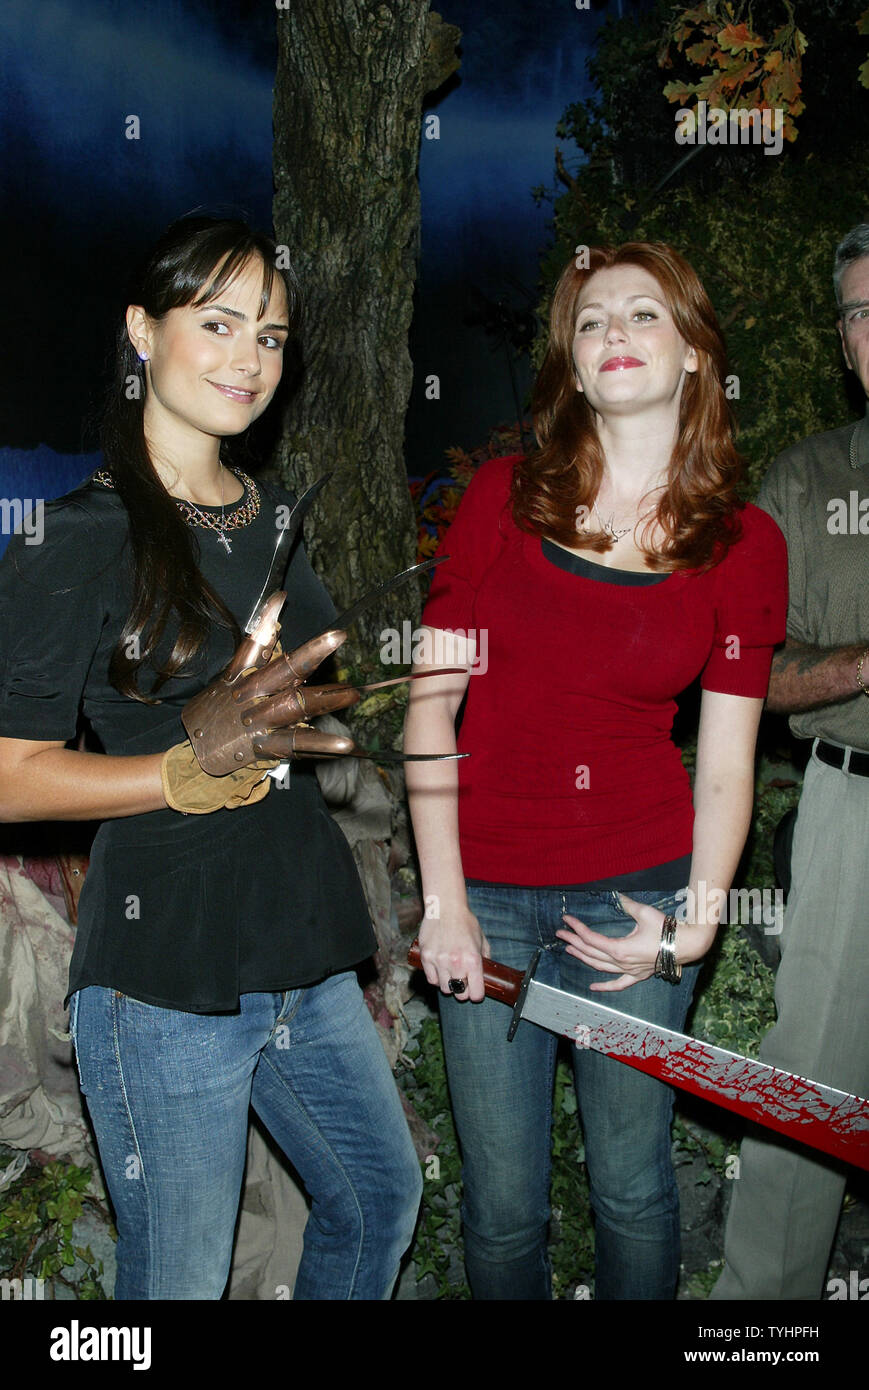 Jordana Brewster (left) and Diora Baird promote their new movie 'The Texas Chainsaw Massacre: The Beginning' at the unveiling of the 'Chamber Live! Featuring House of Horrors' at Madame Tussauds in New York on September 28, 2006.  (UPI Photo/Laura Cavanaugh) Stock Photo